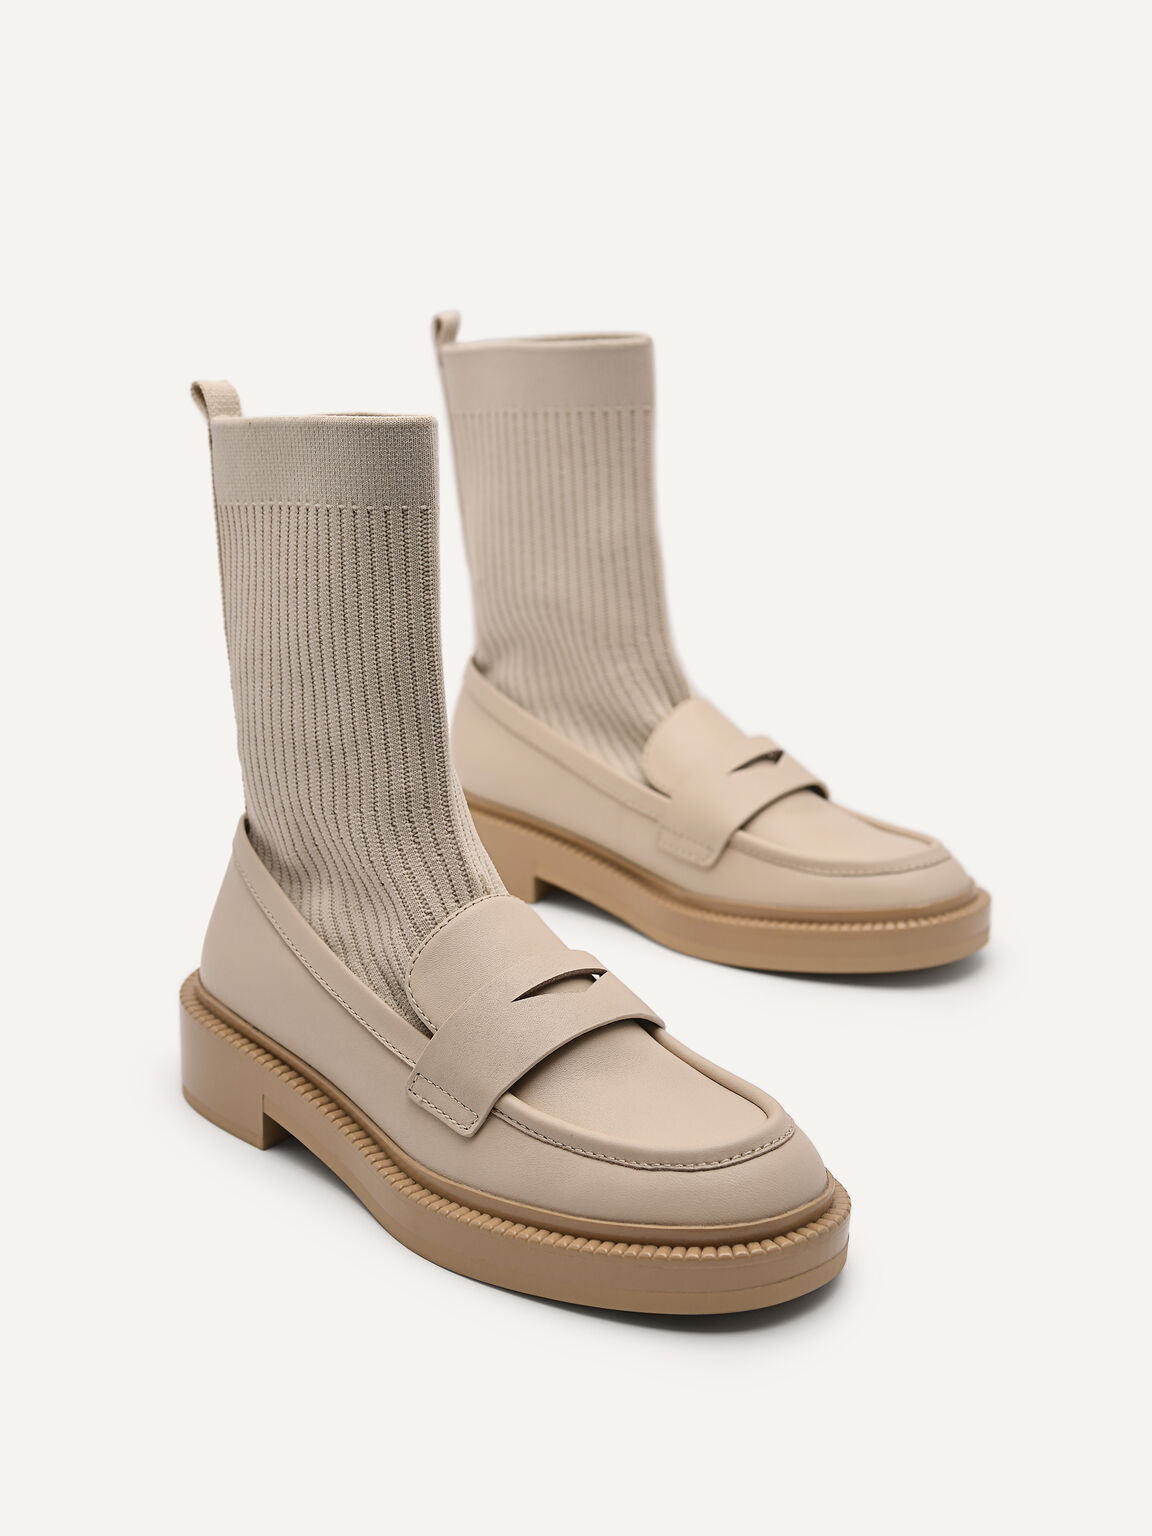 Leather Gropius Boots, Sand